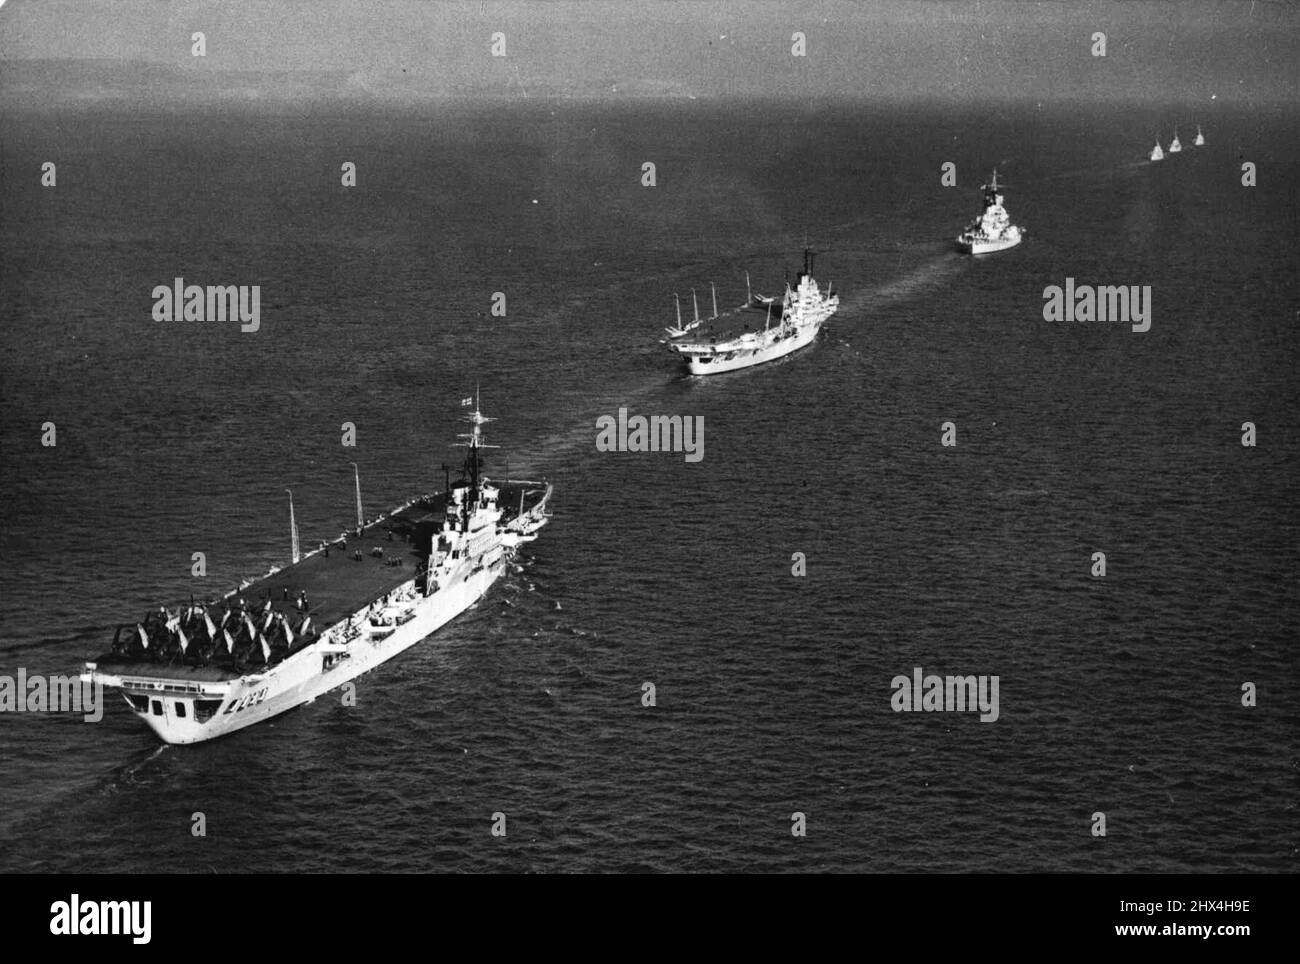 British Home Fleet to Show The Flag - An aerial view as the Home Fleet heads down the English Channel. Nearest camera is the light aircraft carrier 'Theseus', with aircraft on her flight deck. Ahead of her is the carrier 'Illustrious' and the 35,000 ton battleship 'Duke of York'. Leading the line are the attendant cruisers. Britain's Home Fleet has left Portland Harbour on a 12 weeks' autumn cruise to the West Indies. The first three days of the journey will be occupied with a mock battle in which all units will take part. September 23, 1948. (Photo by Sport & General Press Agency, Limited). Stock Photo